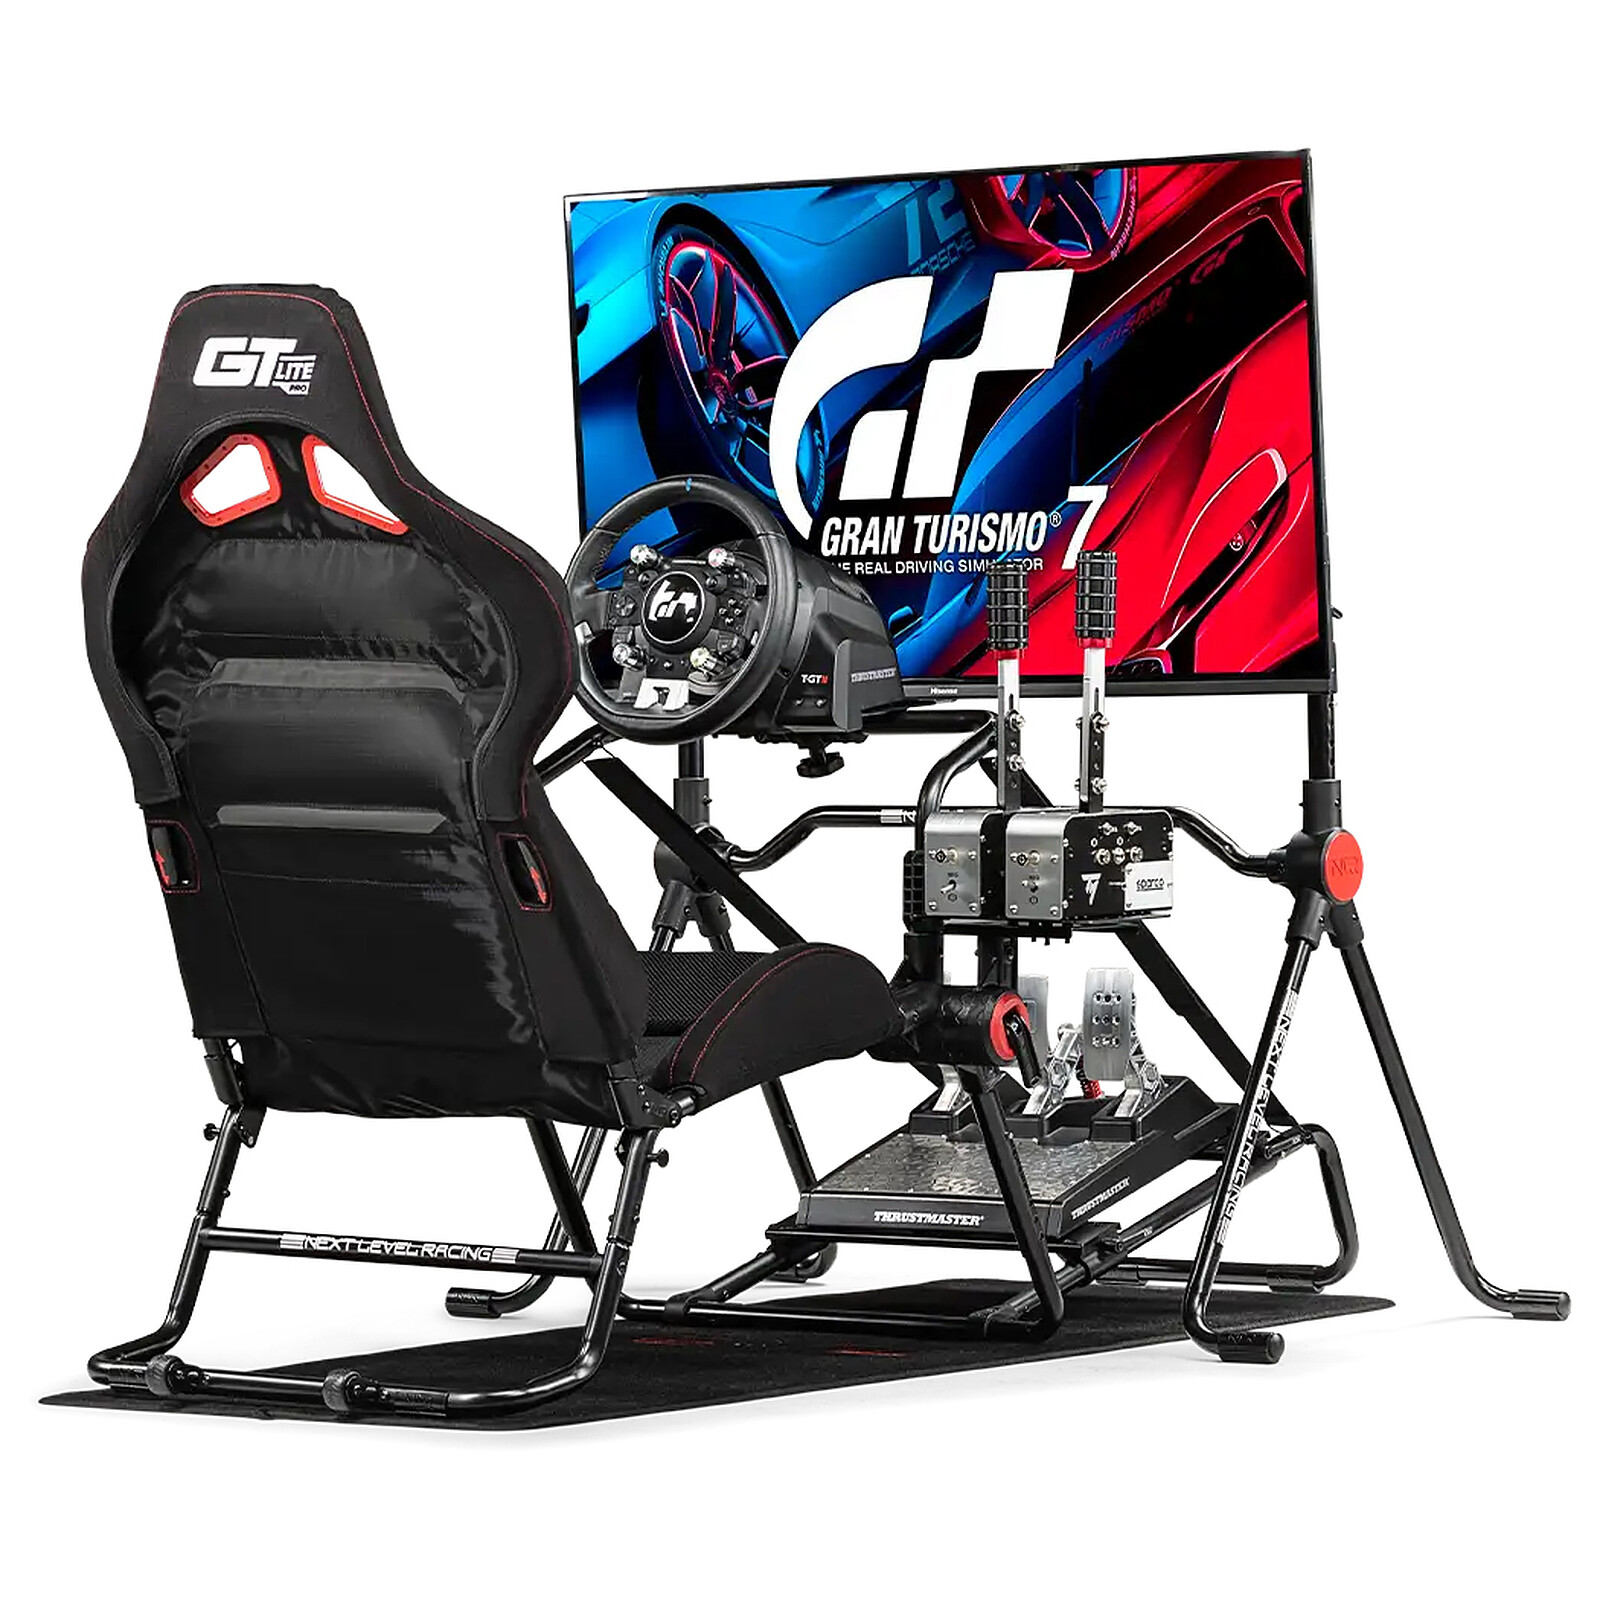 Next Level Racing GT Lite Pro - Other gaming accessories - LDLC 3